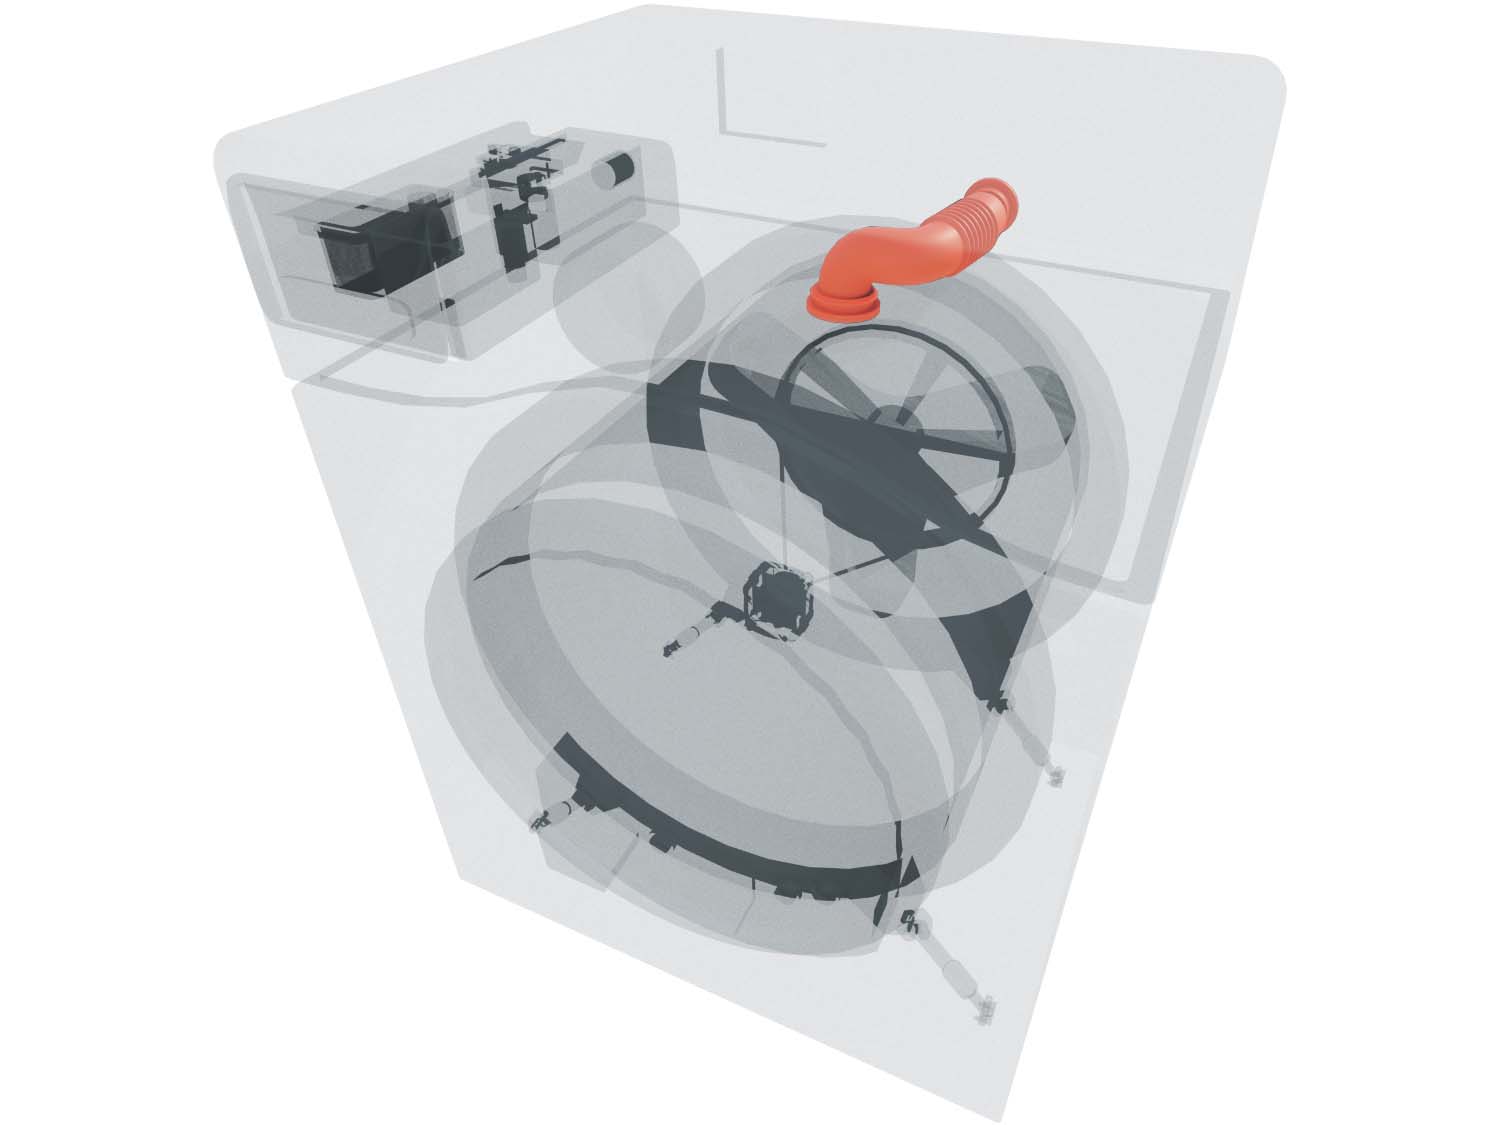 A 3D diagram showing the components of a washer and specifying the location of the tub vent tube